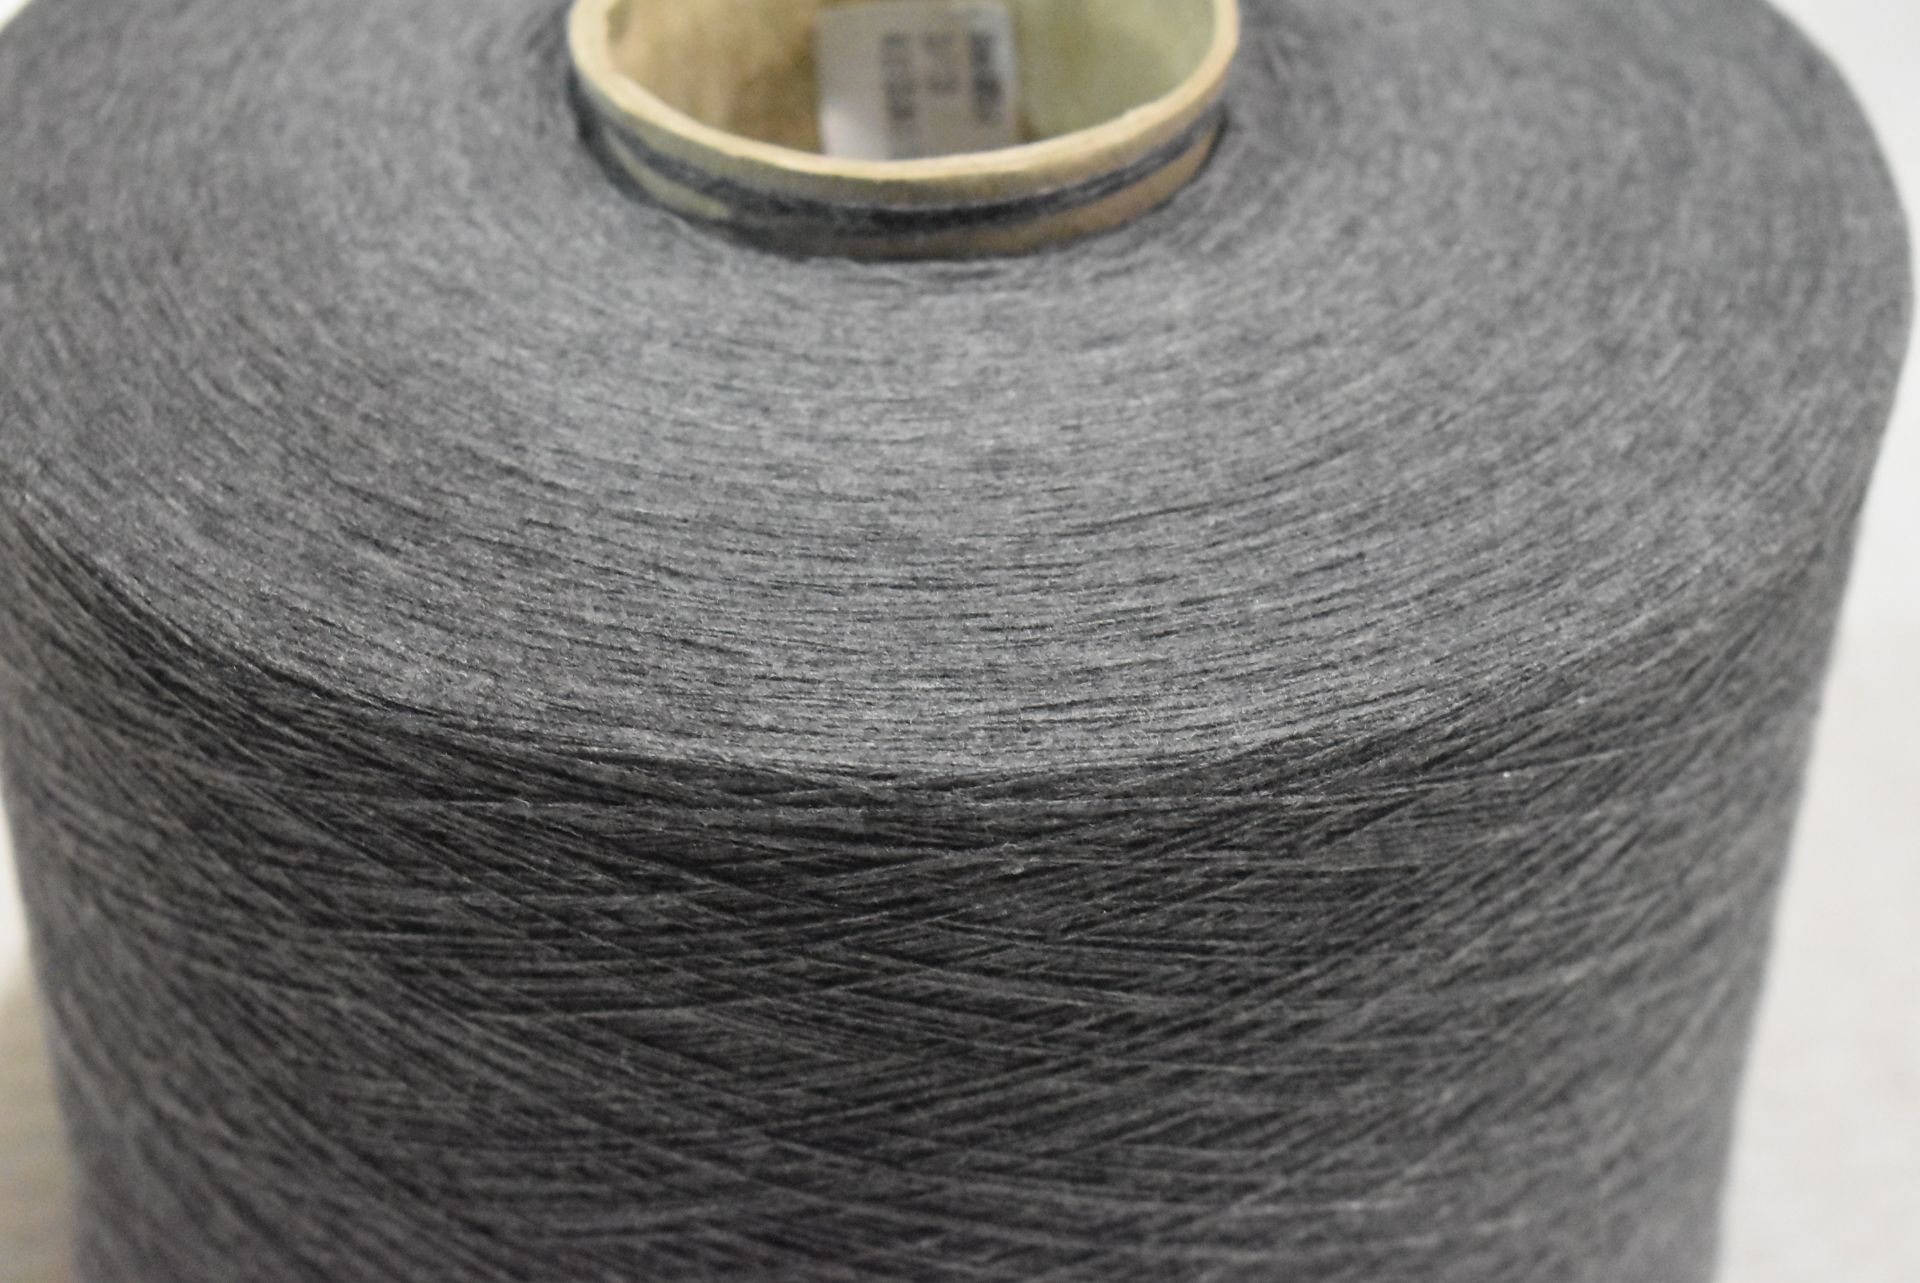 36 x Cones of 1/13 MicroCotton Knitting Yarn - Mid Grey - Approx Weight: 2,500g - New Stock ABL Yarn - Image 6 of 12